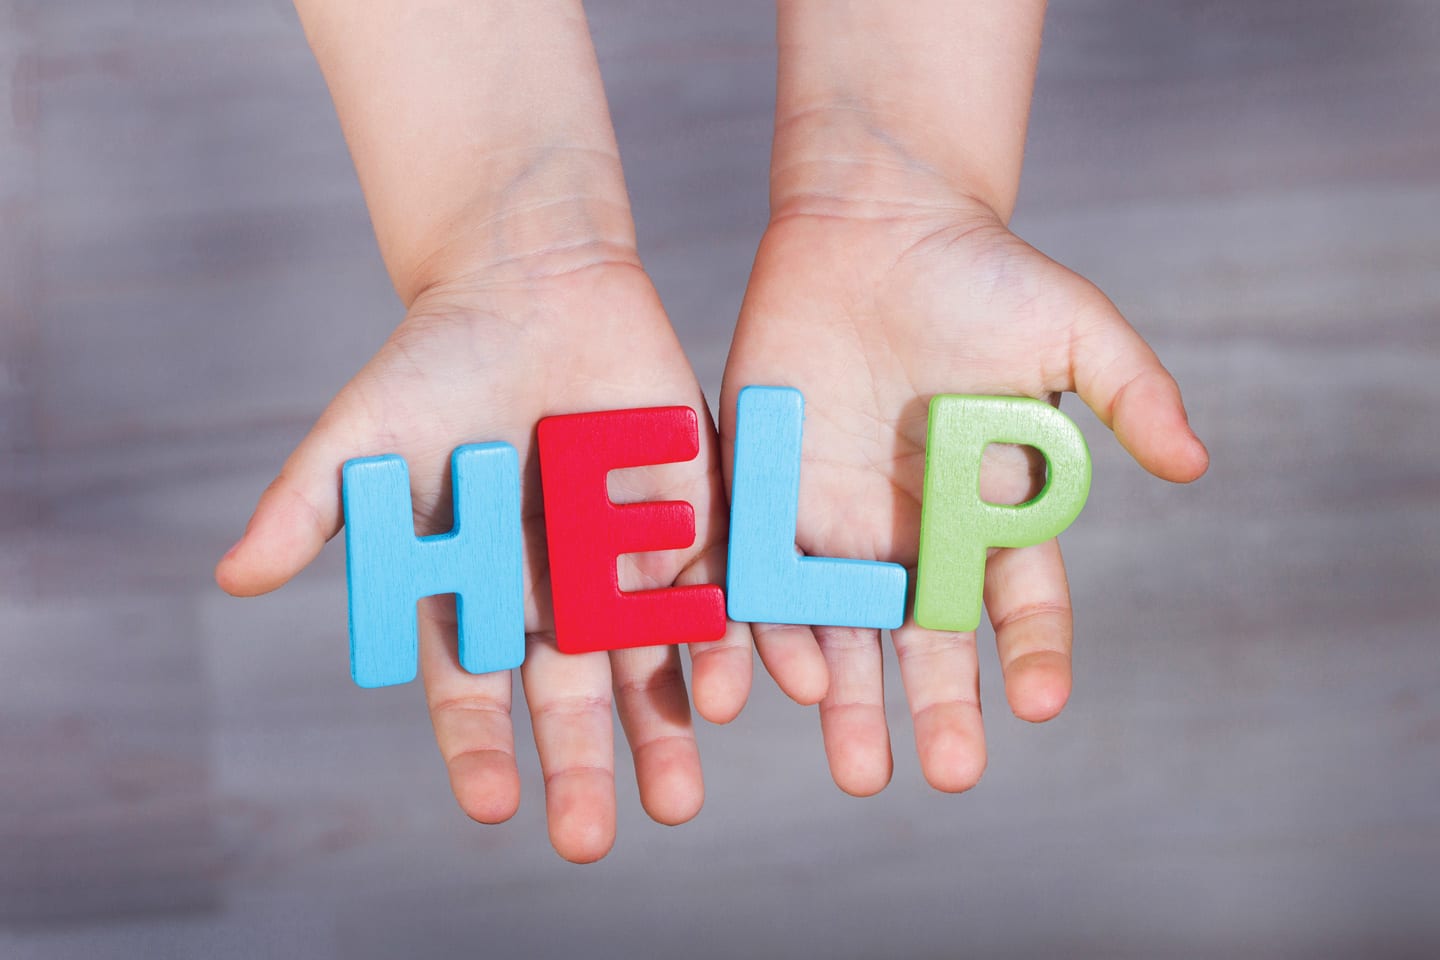 Does My Child Need Help? HealthScopeHealthScope